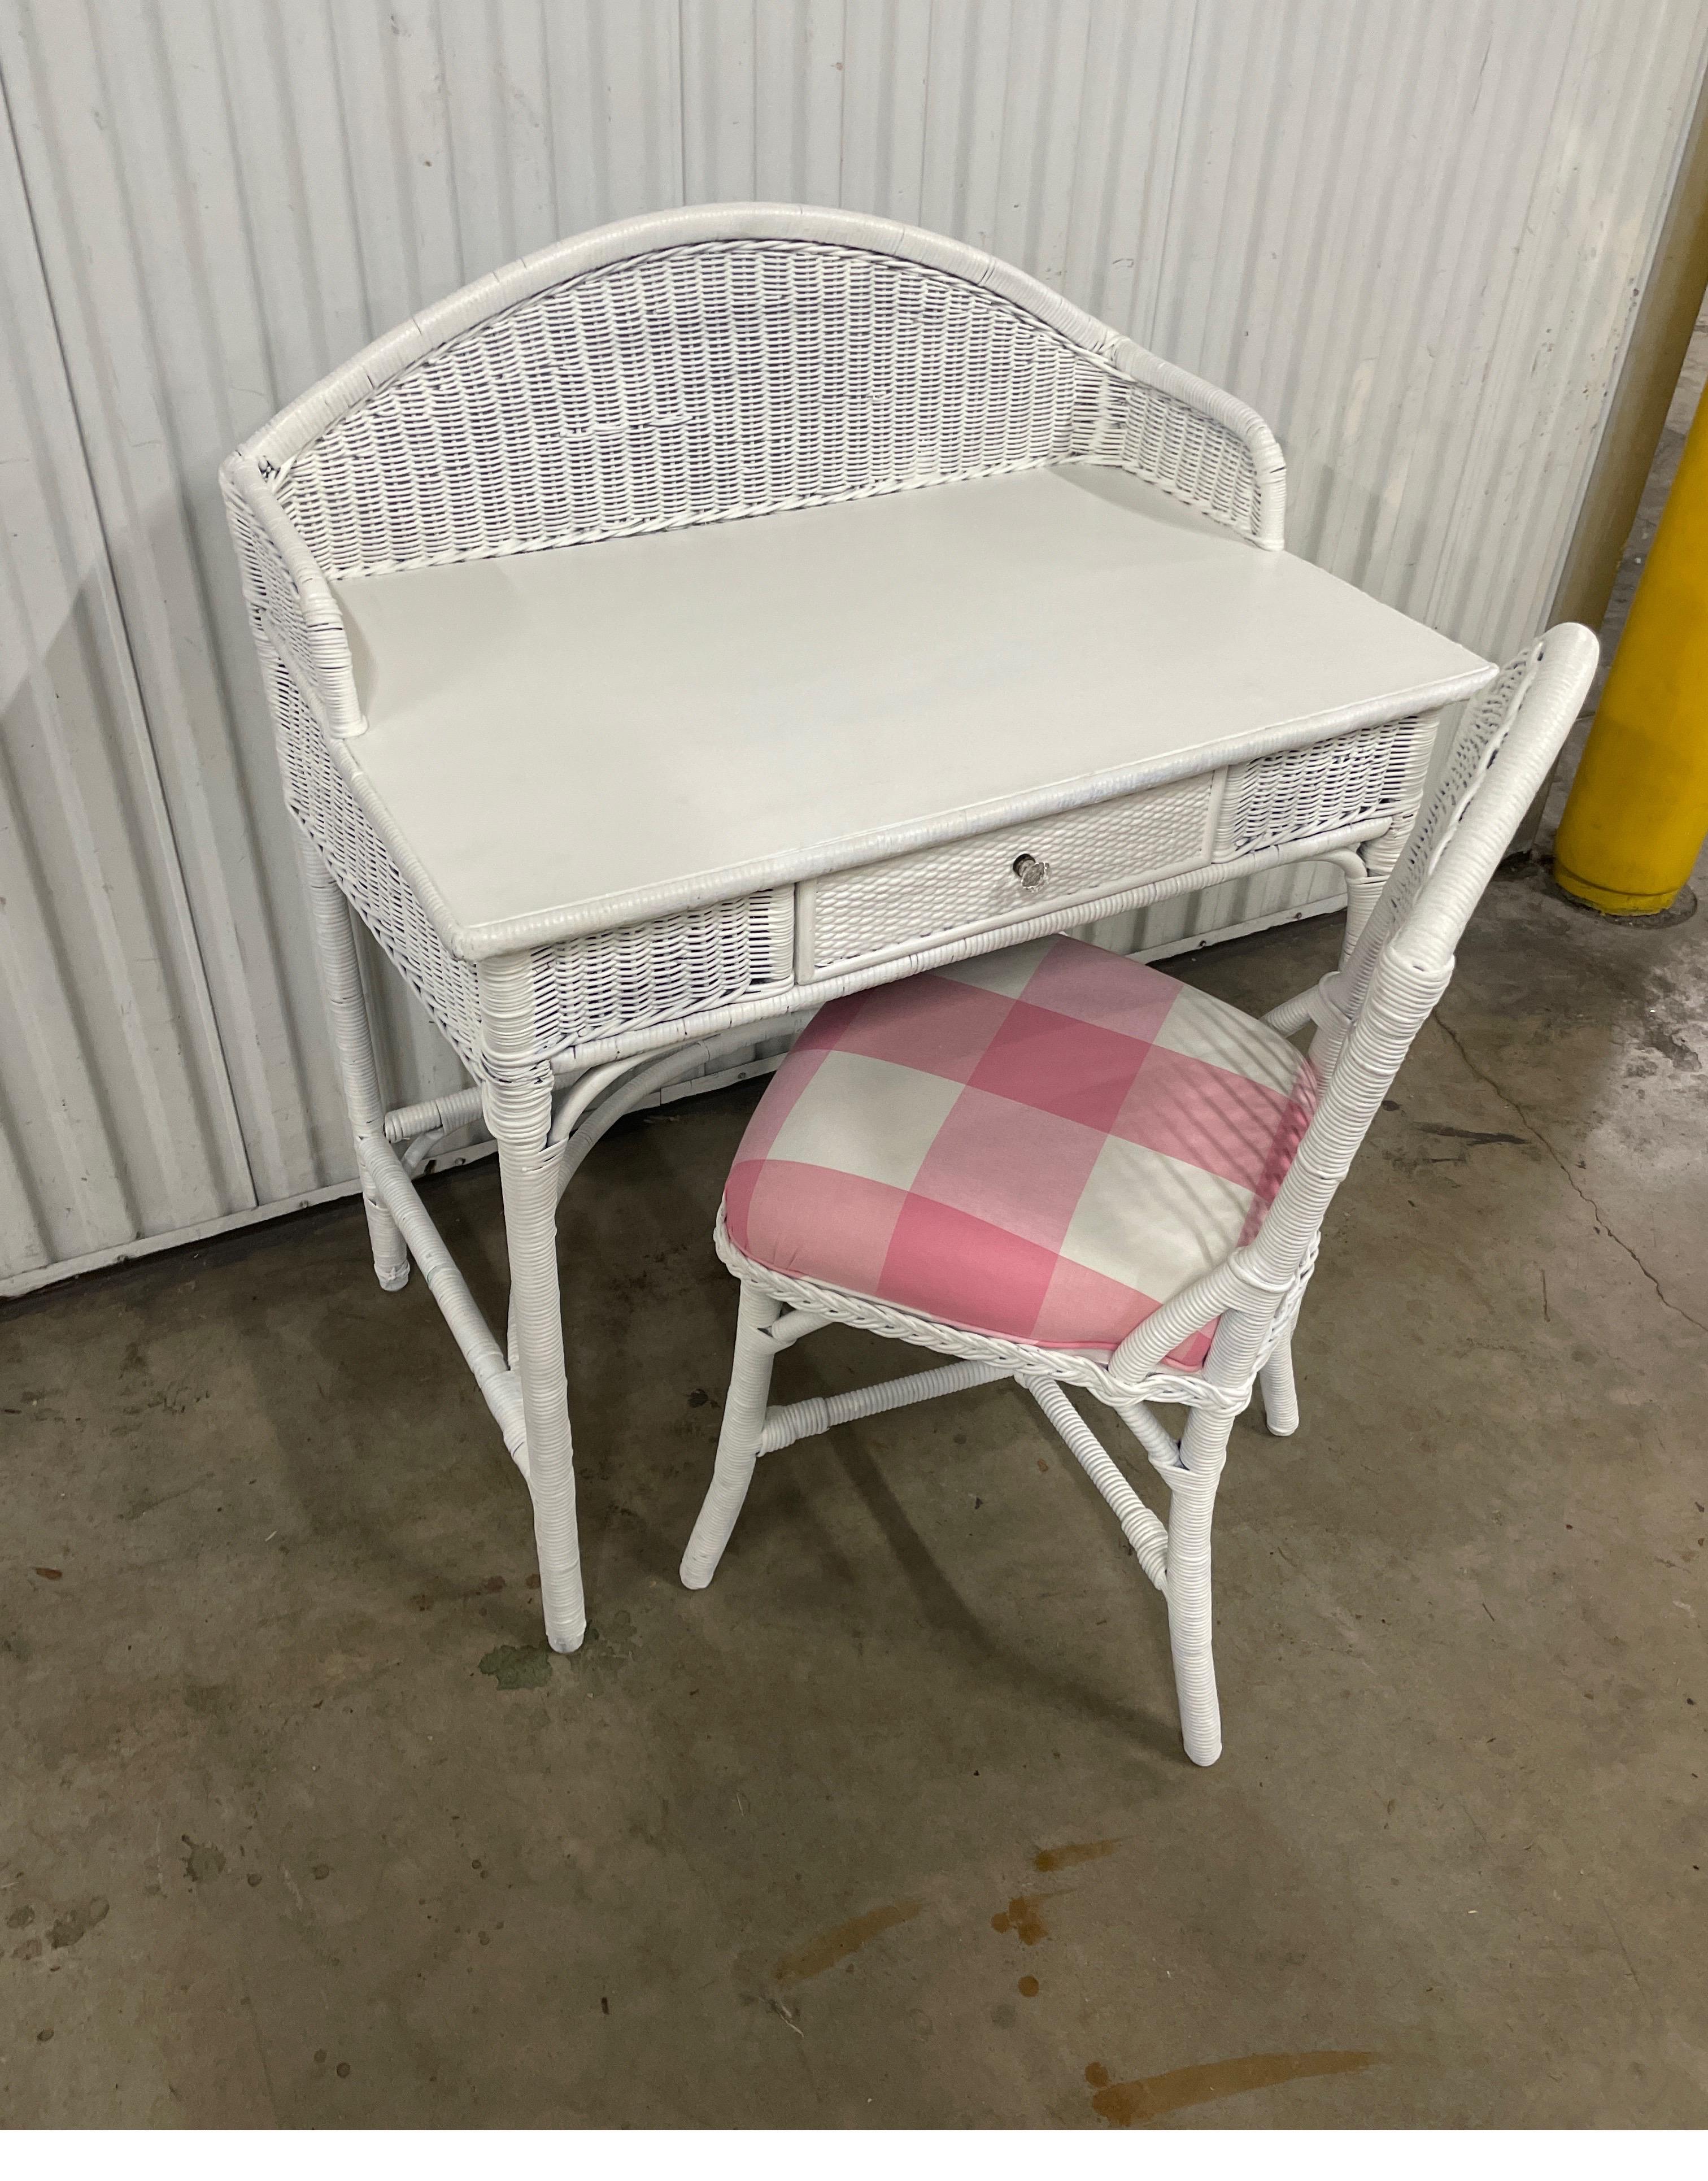 Charming antique wicker vanity / desk with matching chair. Chair seat cushion has been reupholstered in a pink & white plaid cotton fabric. A very sweet set!.